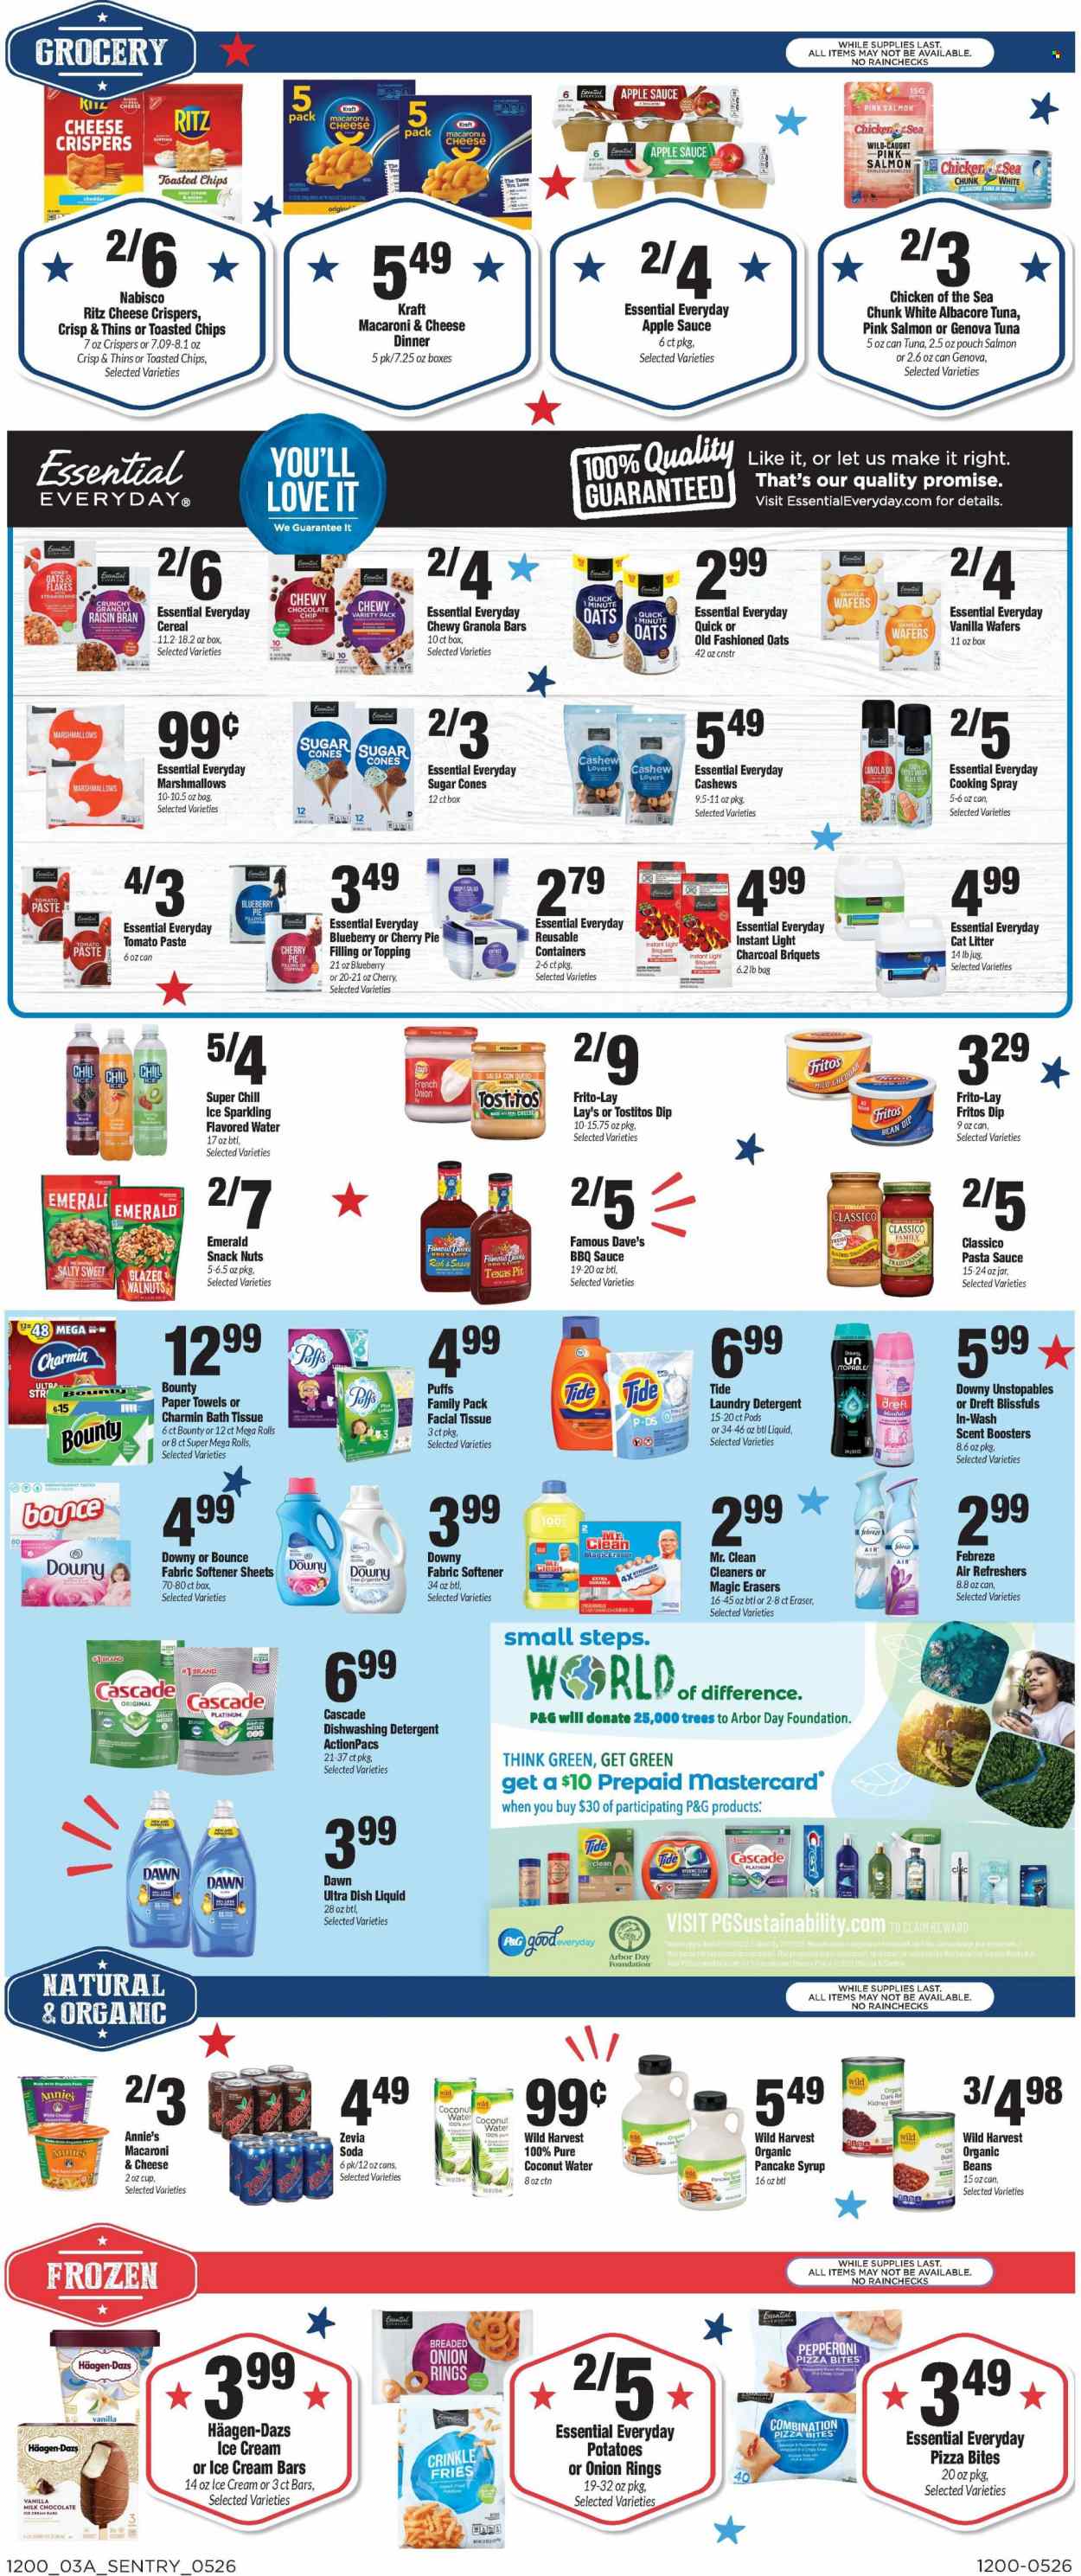 thumbnail - Sentry Foods Flyer - 05/26/2022 - 06/01/2022 - Sales products - puffs, cherry pie, beans, potatoes, Wild Harvest, strawberries, salmon, macaroni & cheese, pizza, pasta sauce, onion rings, soup, sauce, Annie's, Kraft®, sausage, pepperoni, dip, ice cream, ice cream bars, Häagen-Dazs, potato fries, crinkle fries, marshmallows, wafers, snack, Bounty, RITZ, Fritos, Lay’s, Thins, Frito-Lay, Tostitos, sugar, pie filling, cherry pie filling, topping, tomato paste, tuna in water, Chicken of the Sea, cereals, granola bar, Raisin Bran, BBQ sauce, salsa, Classico, canola oil, cooking spray, extra virgin olive oil, olive oil, oil, apple sauce, honey, pancake syrup, syrup, cashews, walnuts, coconut water, flavored water, soda, bath tissue, kitchen towels, paper towels, Charmin, detergent, Febreze, Cascade, Tide, Unstopables, fabric softener, laundry detergent, Bounce, scent booster, Downy Laundry, dishwashing liquid, Crest, body lotion. Page 3.